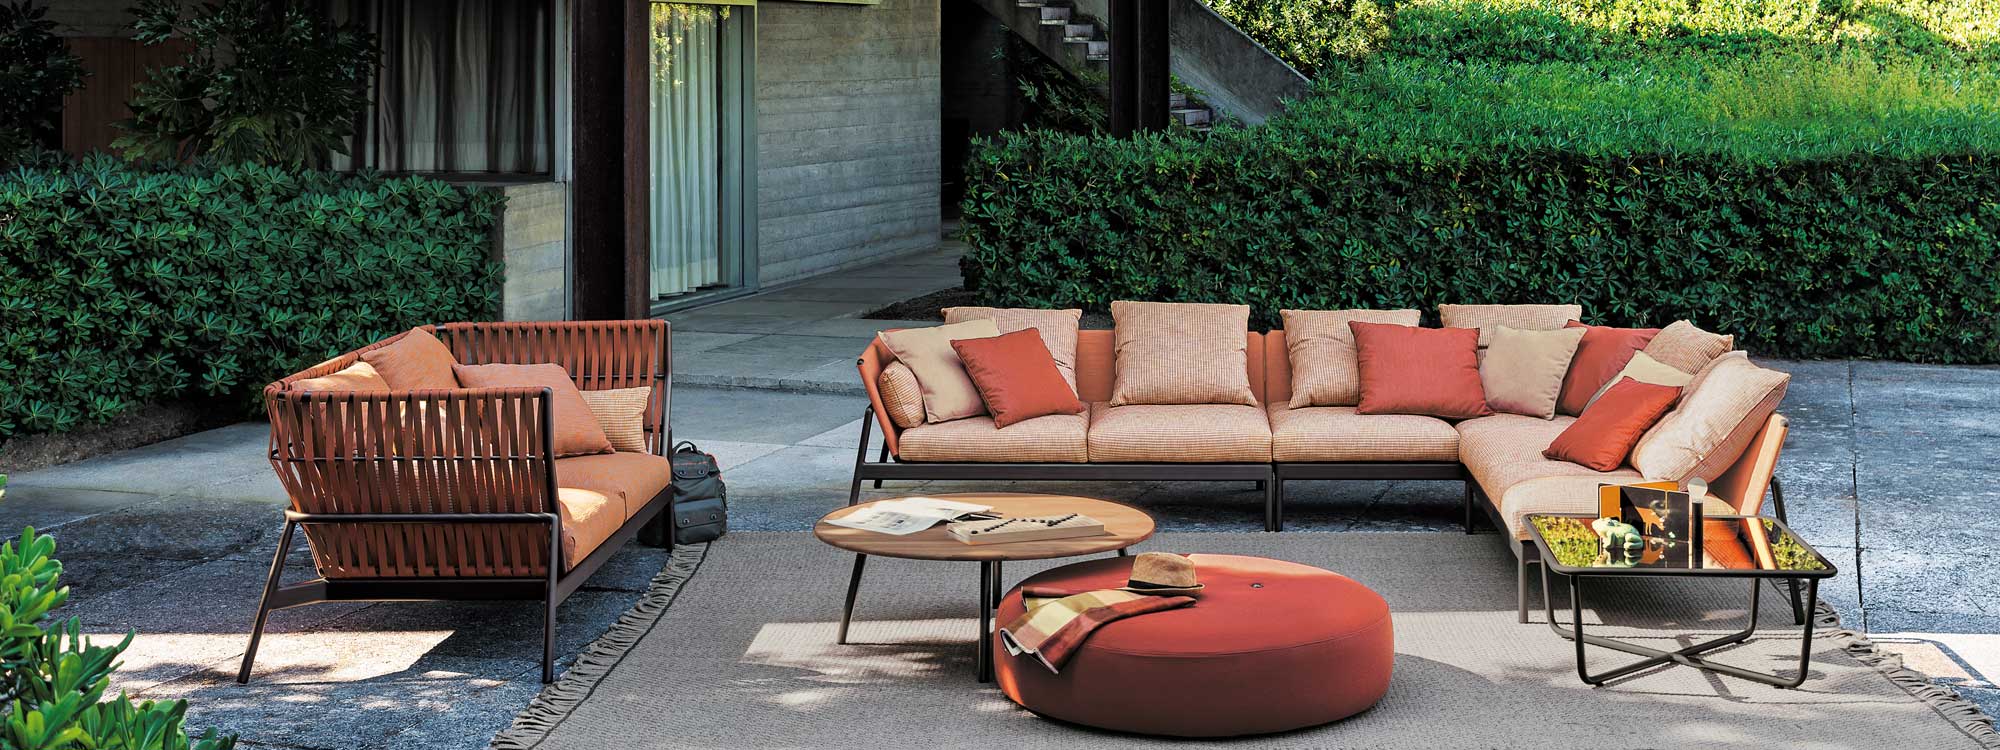 Image showing Piper high back garden sofa and regular back outdoor sofa with orange backs and orange cushions, with Double round garden pouf by RODA in the center